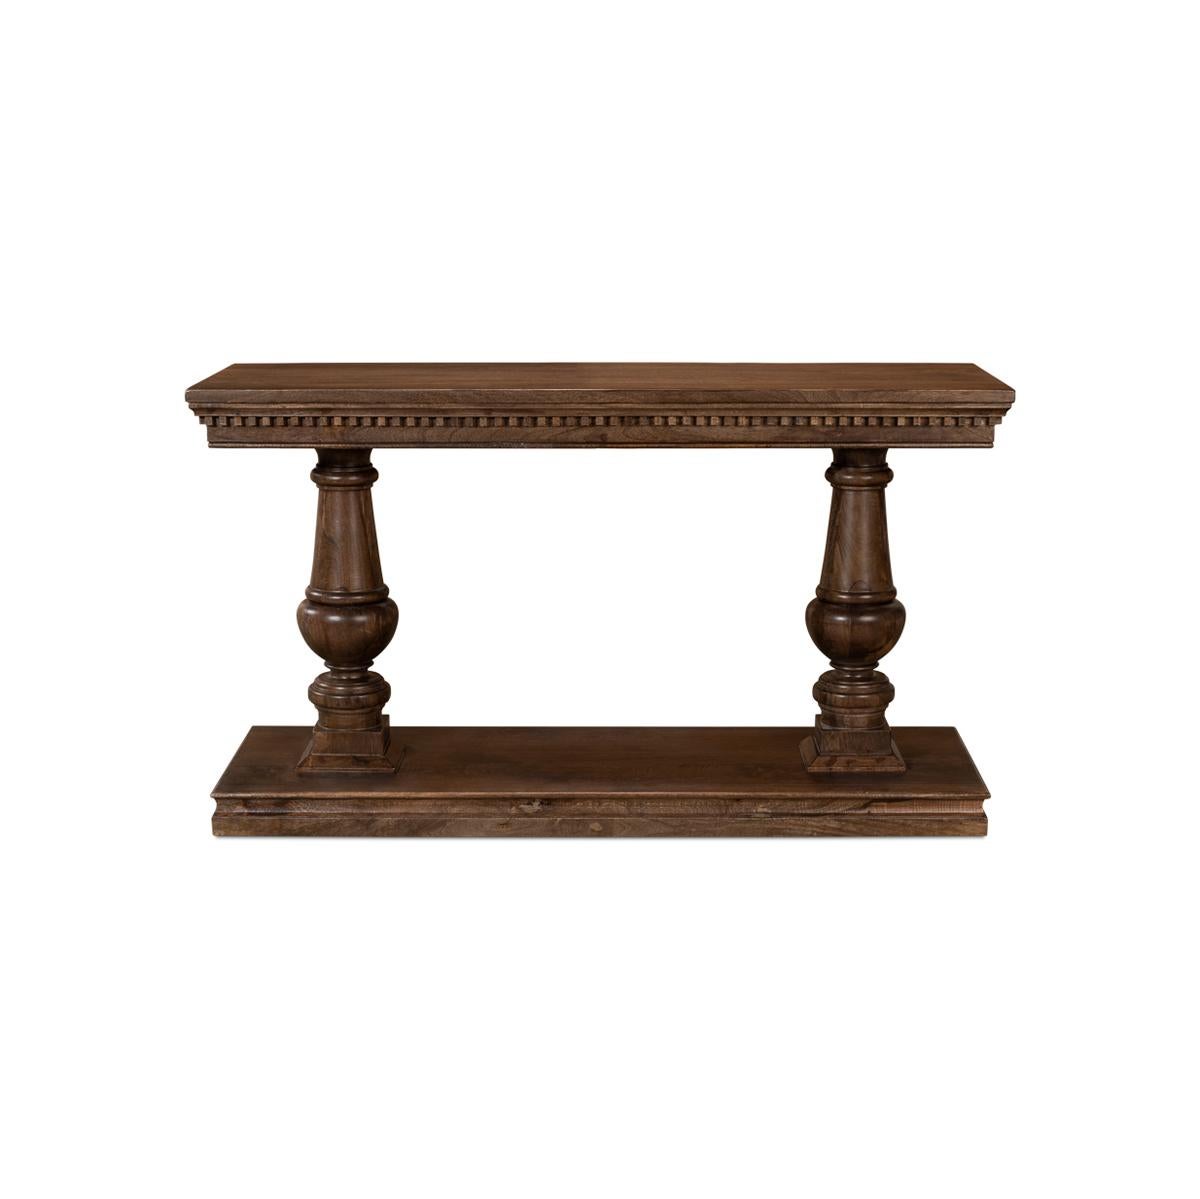 Bring a touch of elegance to your space with our Northern European Style NeoClassic Console Table. This piece is a true masterpiece, seamlessly blending 18th-century design elements with modern sensibilities.

Expertly crafted from warm